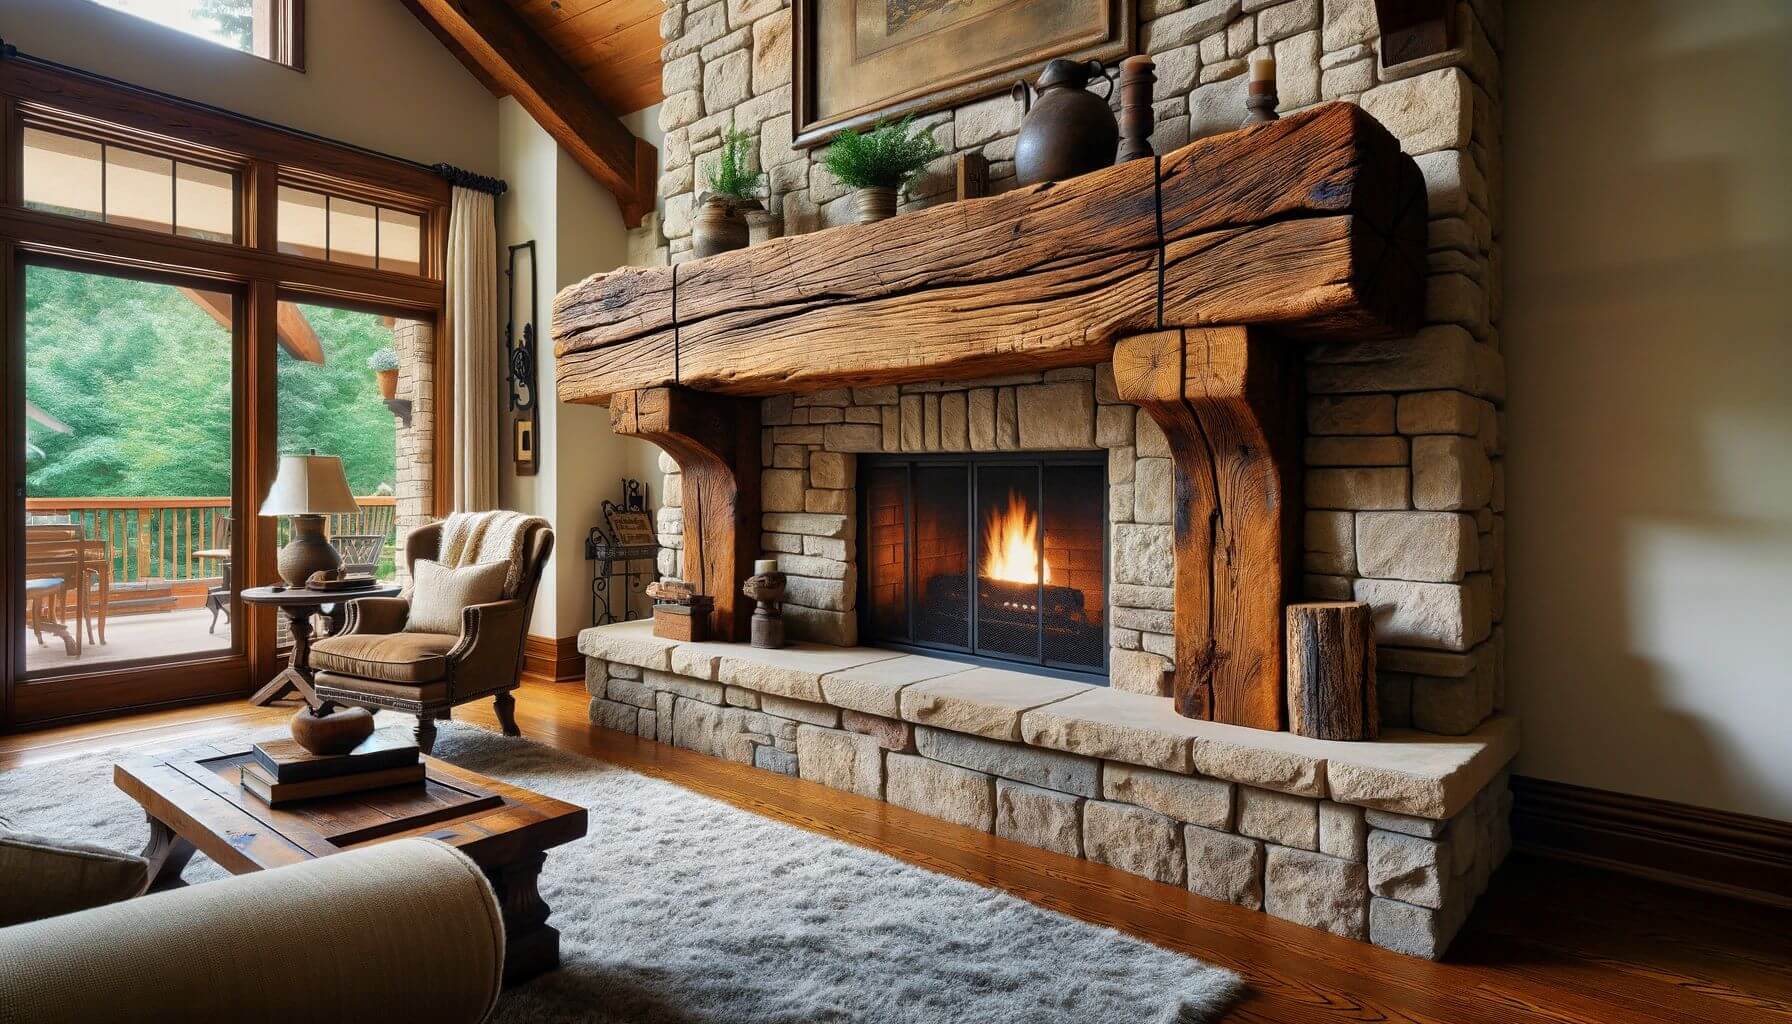 How To Create Cozy Fireplace Decor for Chilly Evenings : 25 ideas